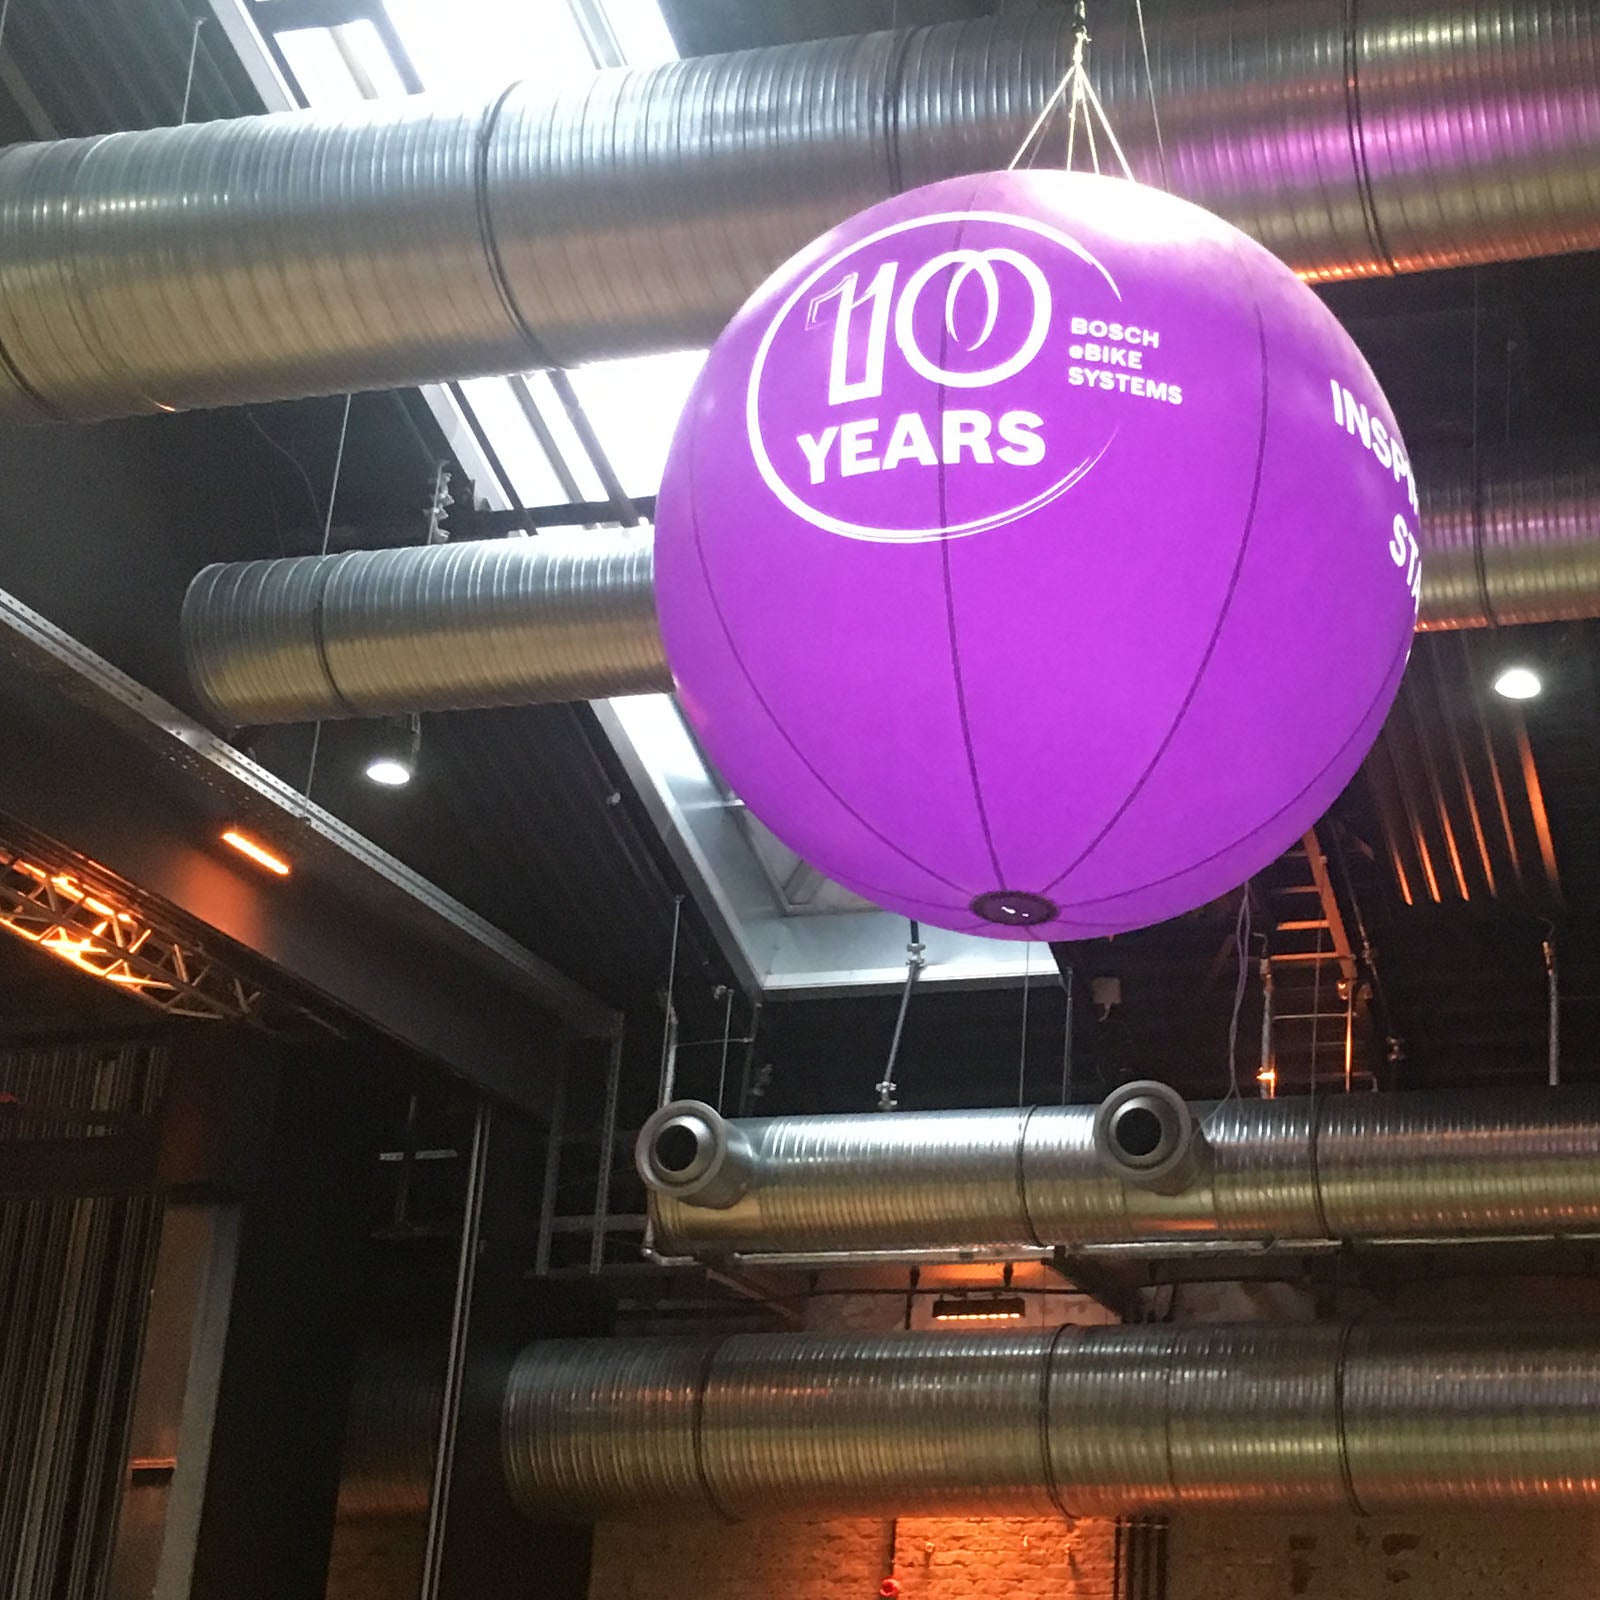 Some advertising balloons on events